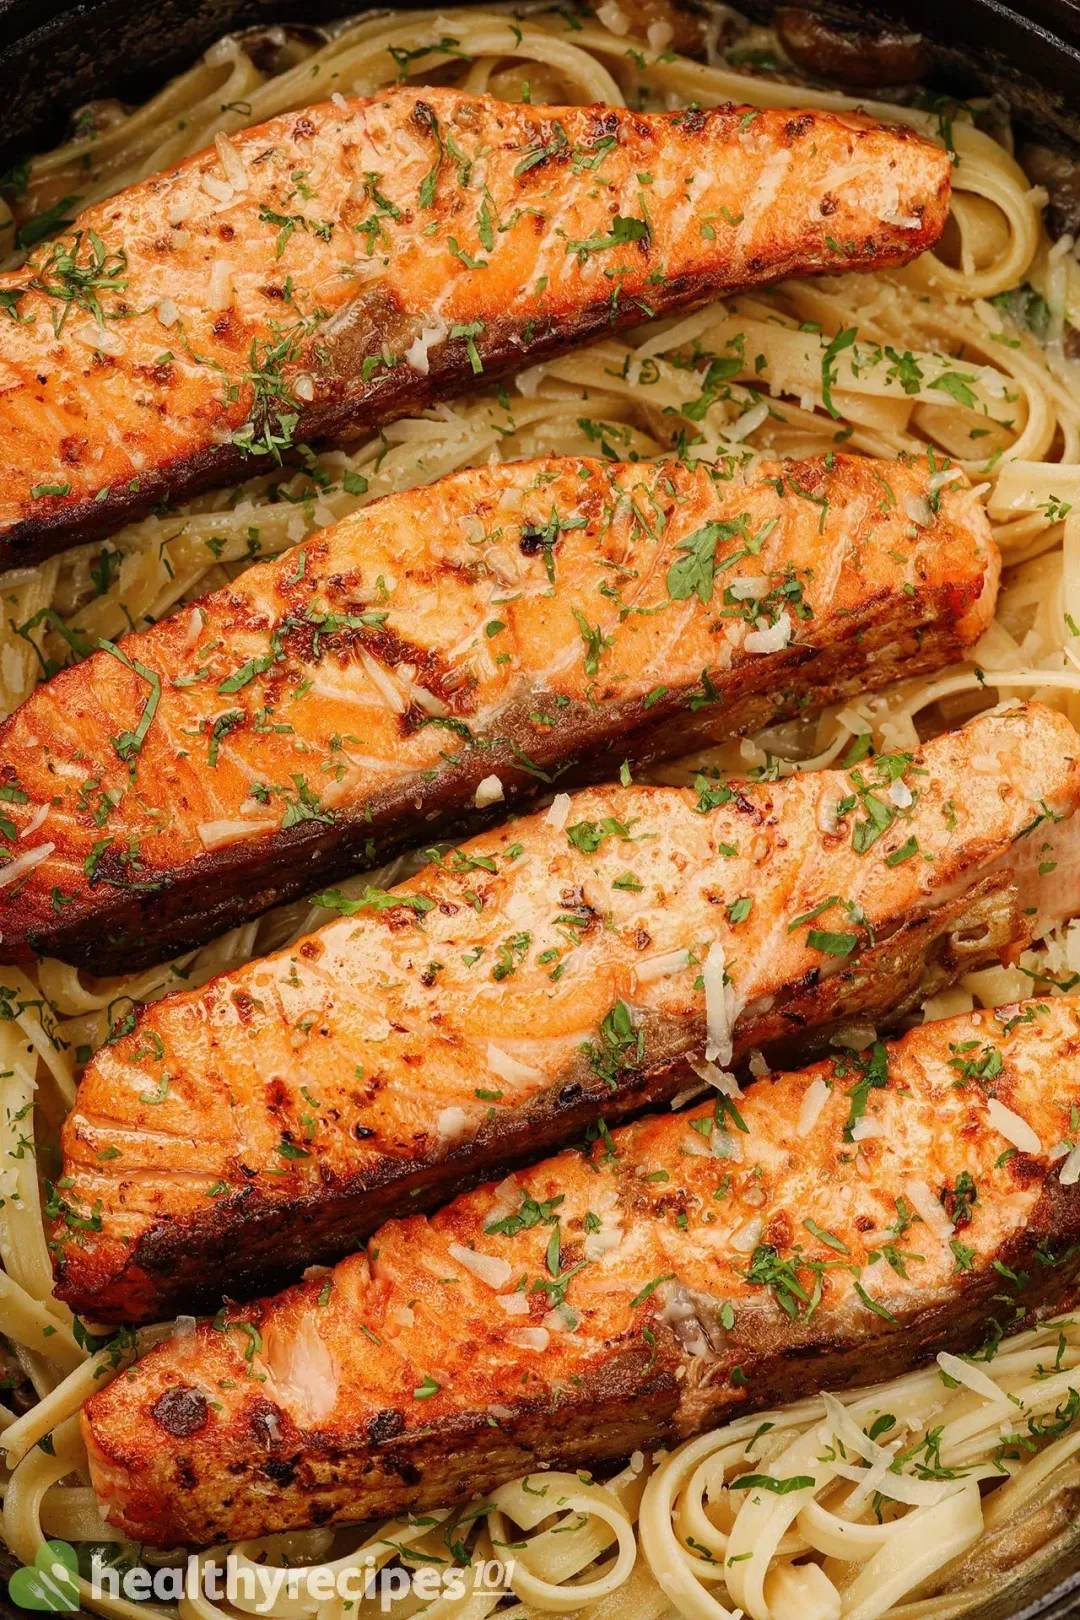 A close-up shot of four bright orange cooked salmon fillets sprinkled with chopped parsley and laid on a bed of fettuccine pasta